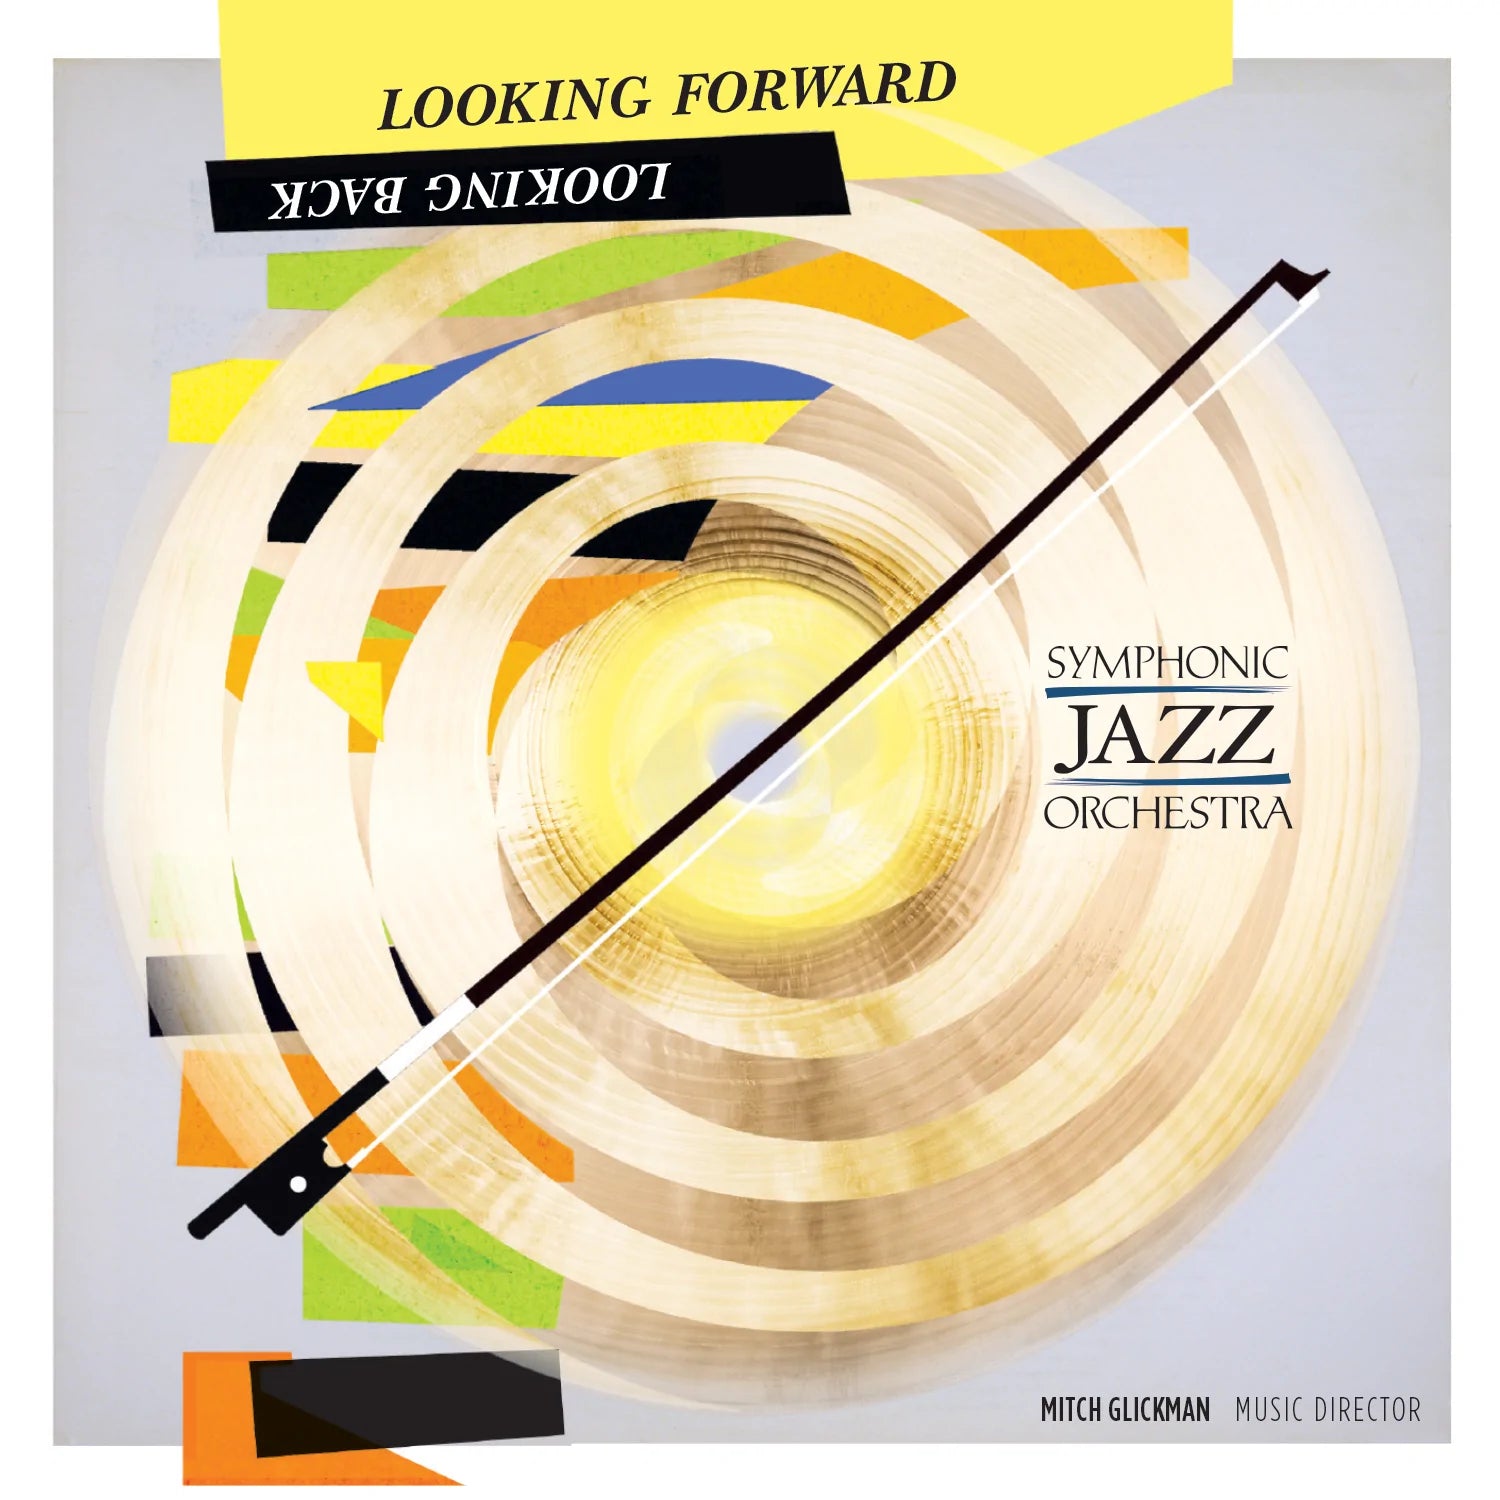 Symphonic Jazz Orchestra - Looking Forward, Looking Back